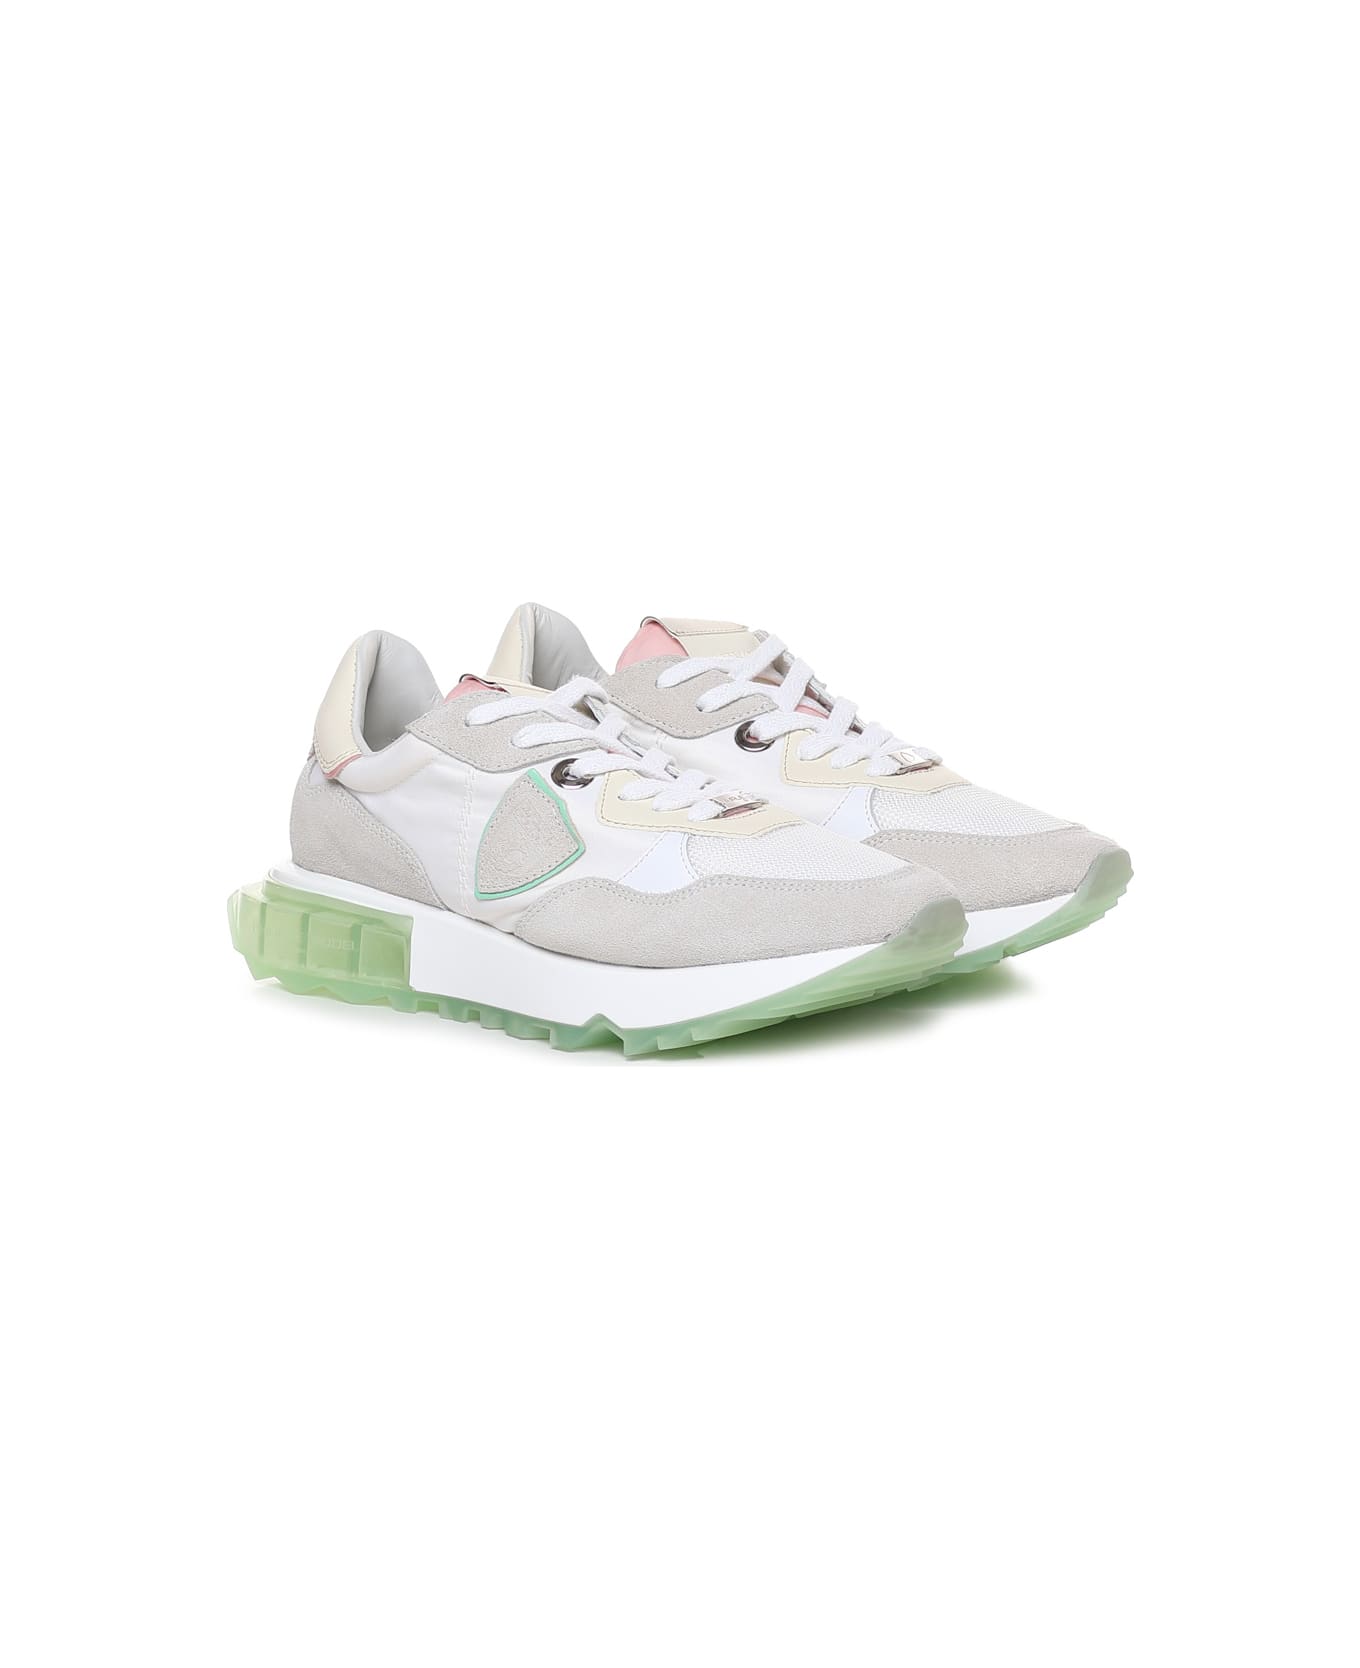 Philippe Model Sneakers With Contrasting Sole - MONDIAL POP_BLANC ROSE スニーカー